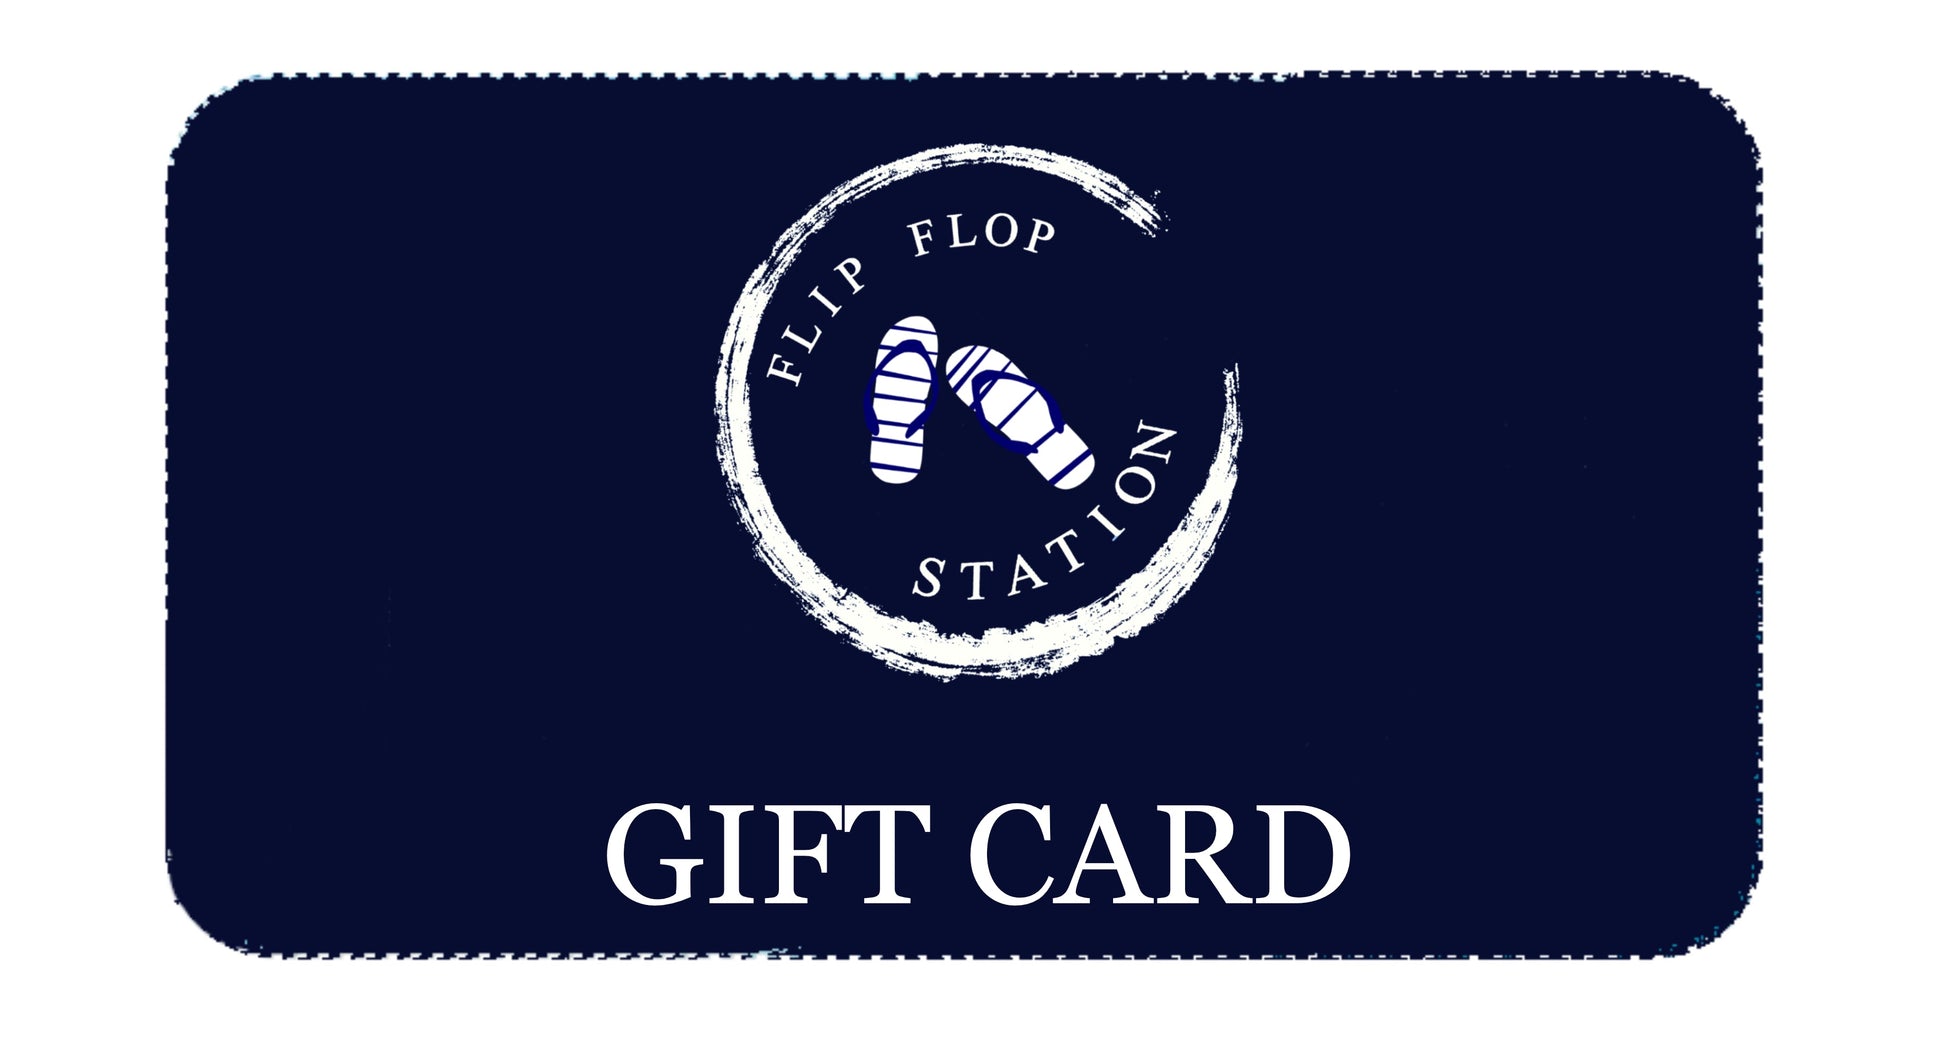 Personalized Designers Flip-flops Gift Card